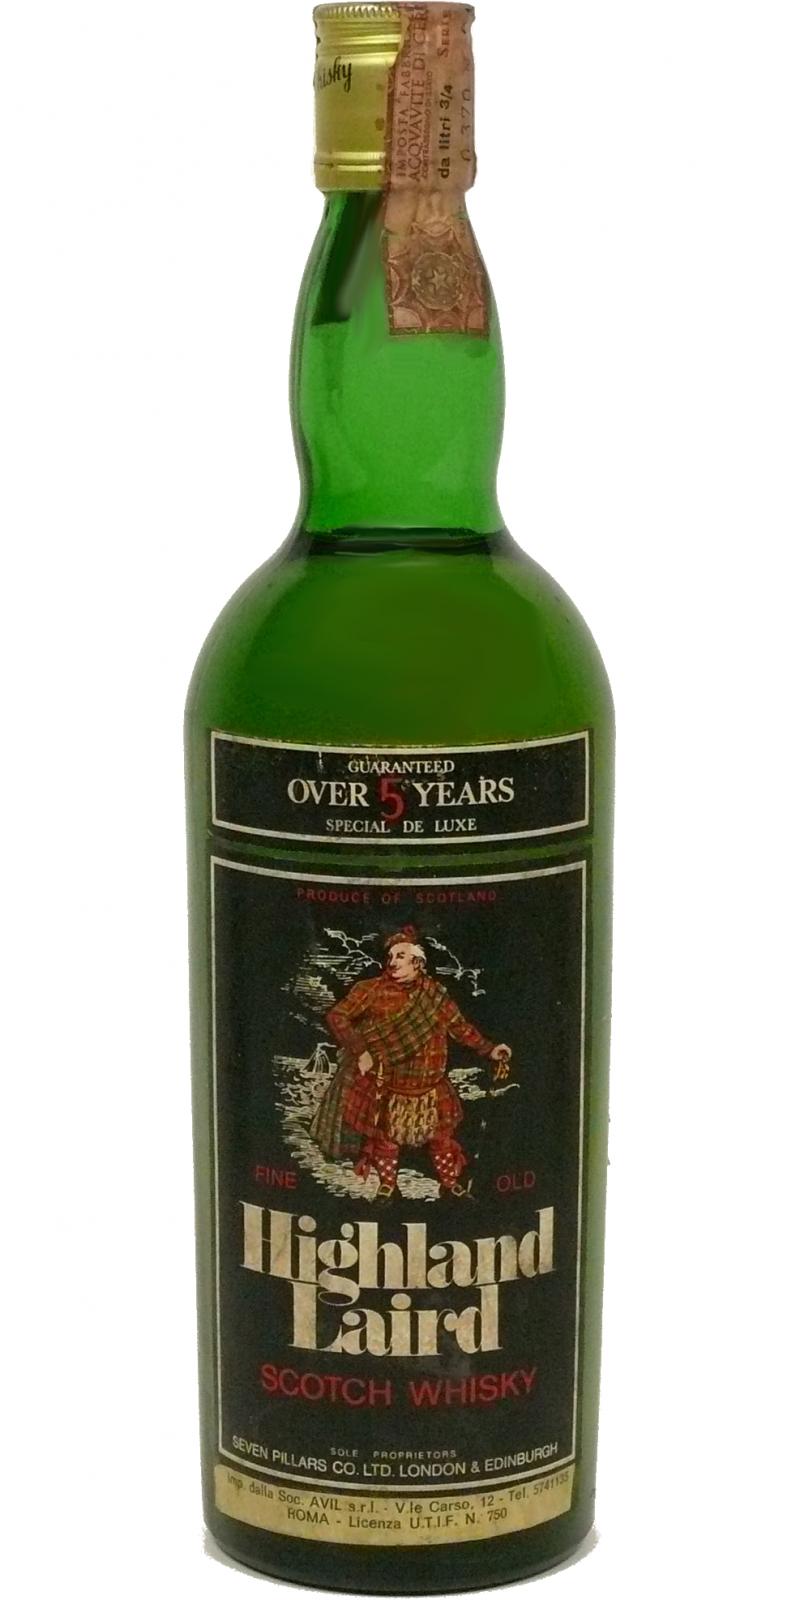 Highland Laird 05-year-old